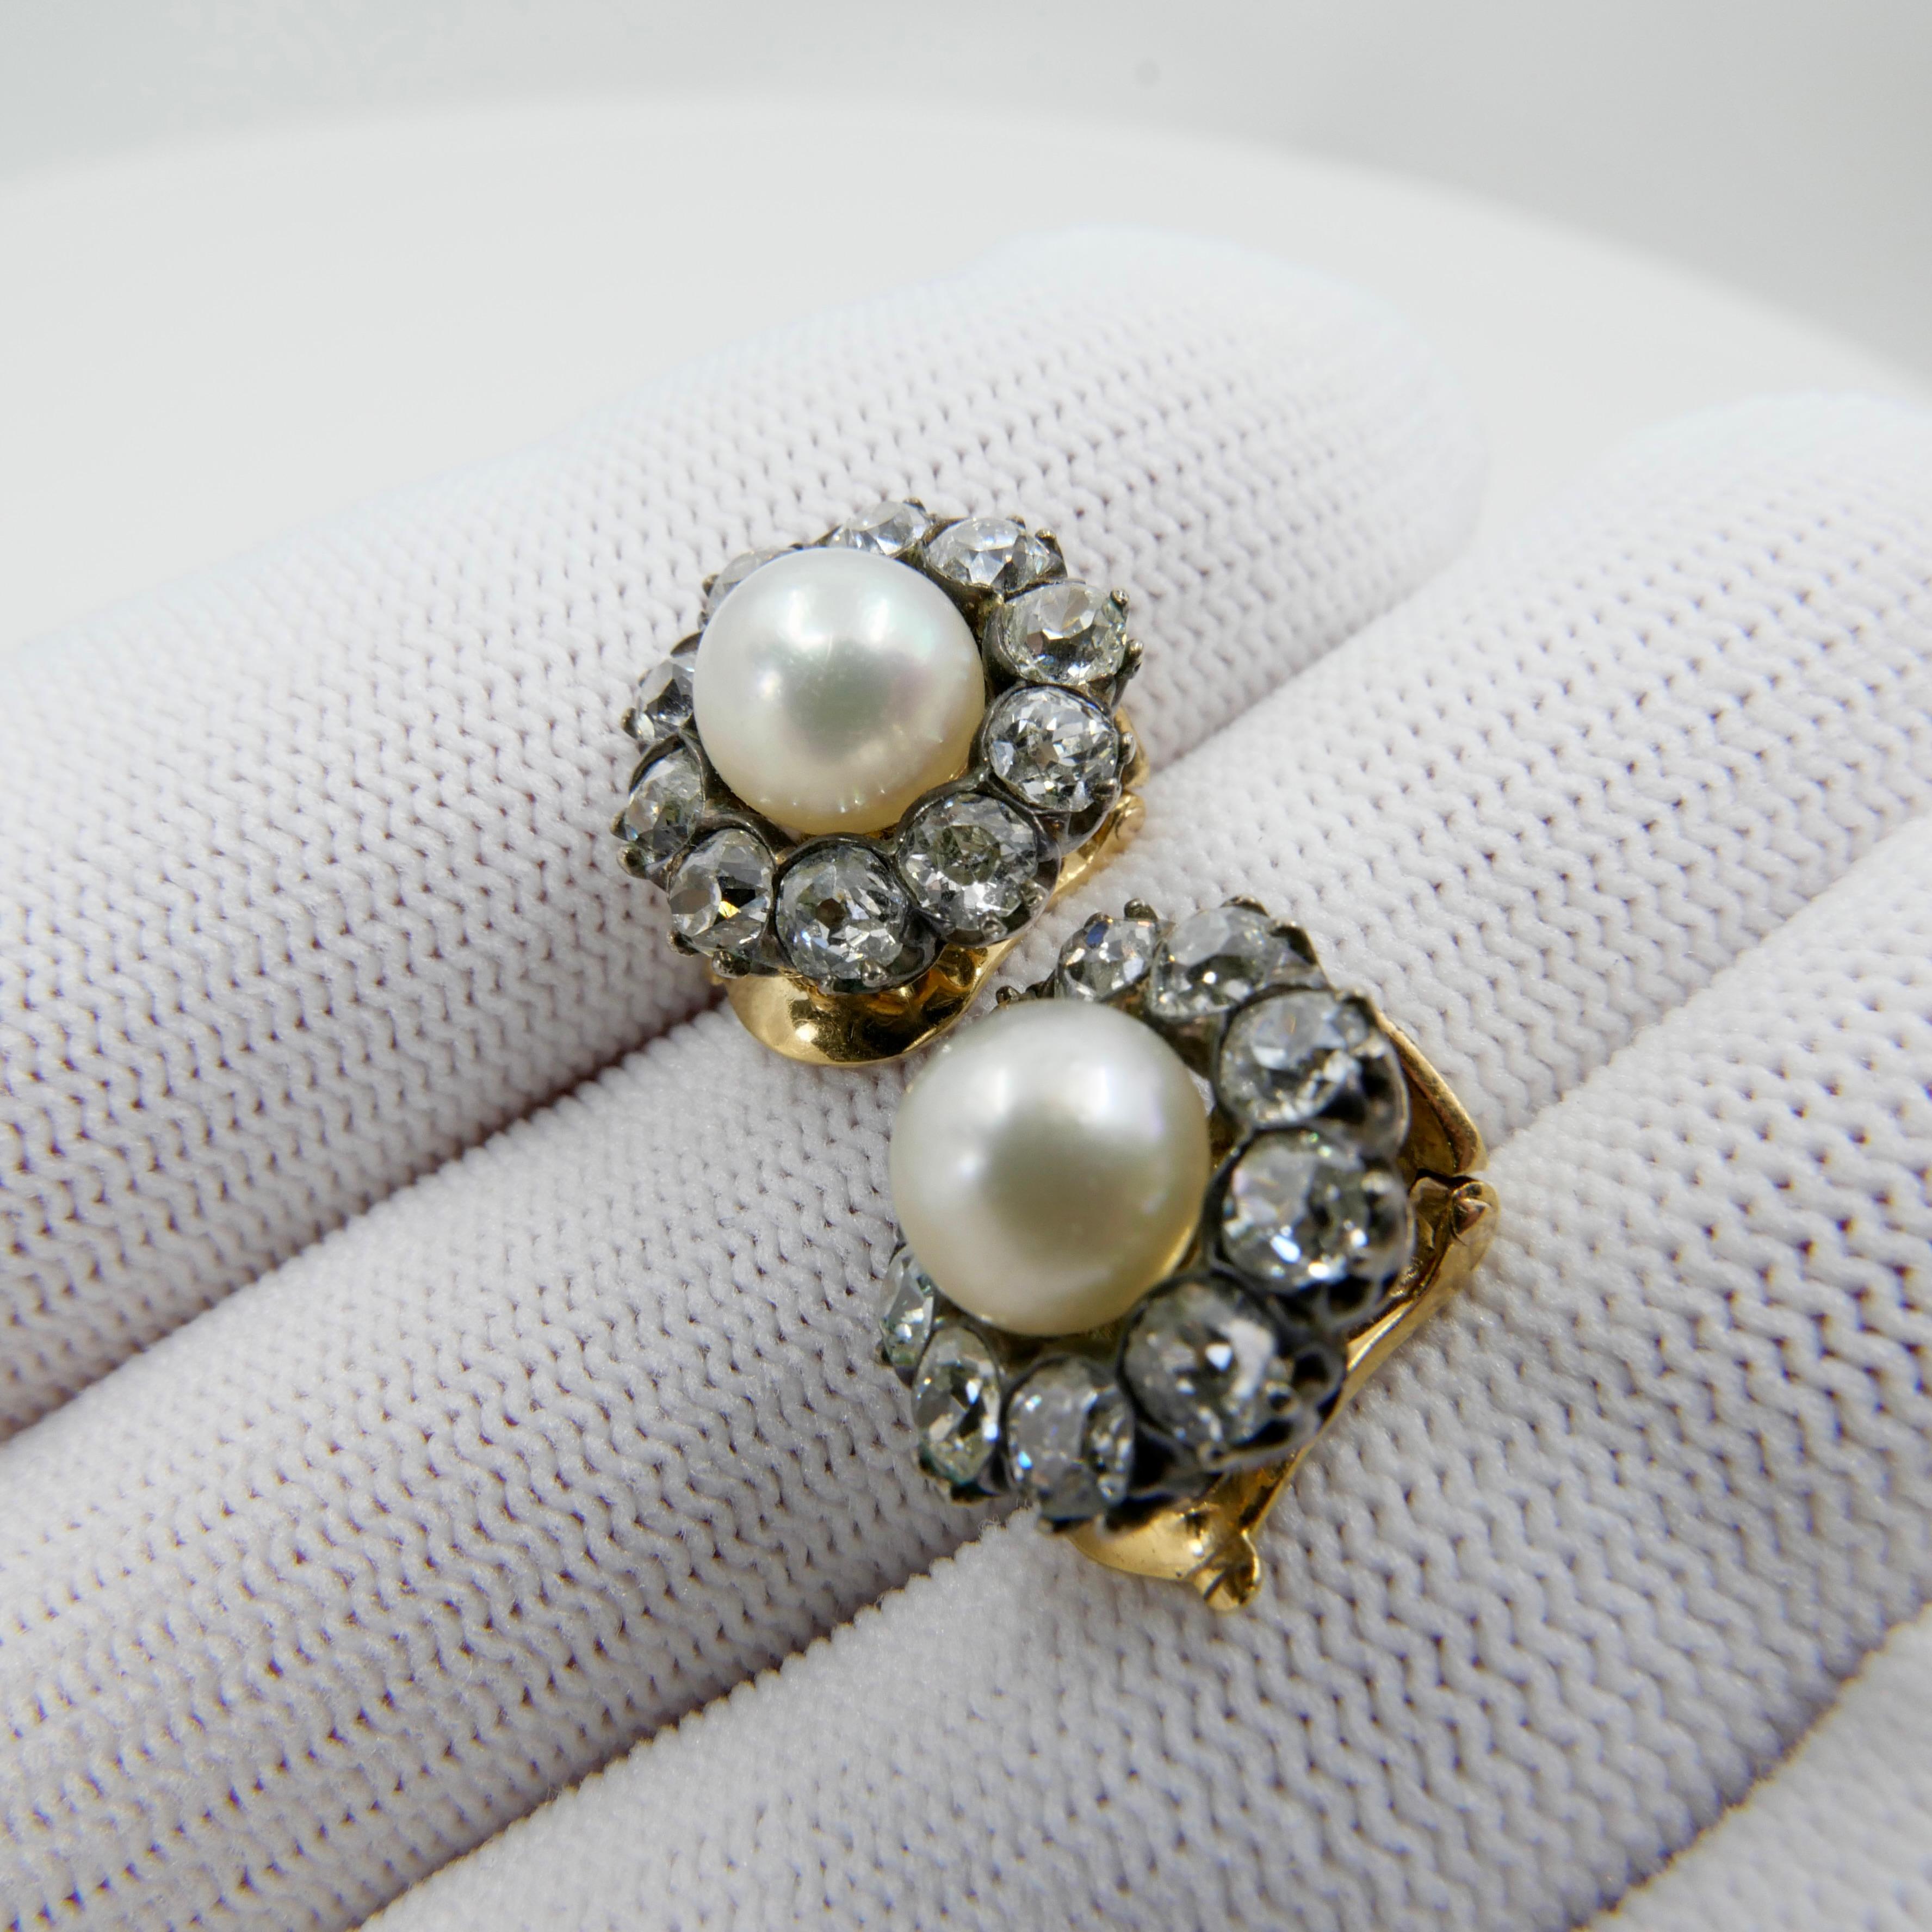 Antique Natural Pearl & Old Cut Diamond Earrings. French Assay & Maker Mark. 7